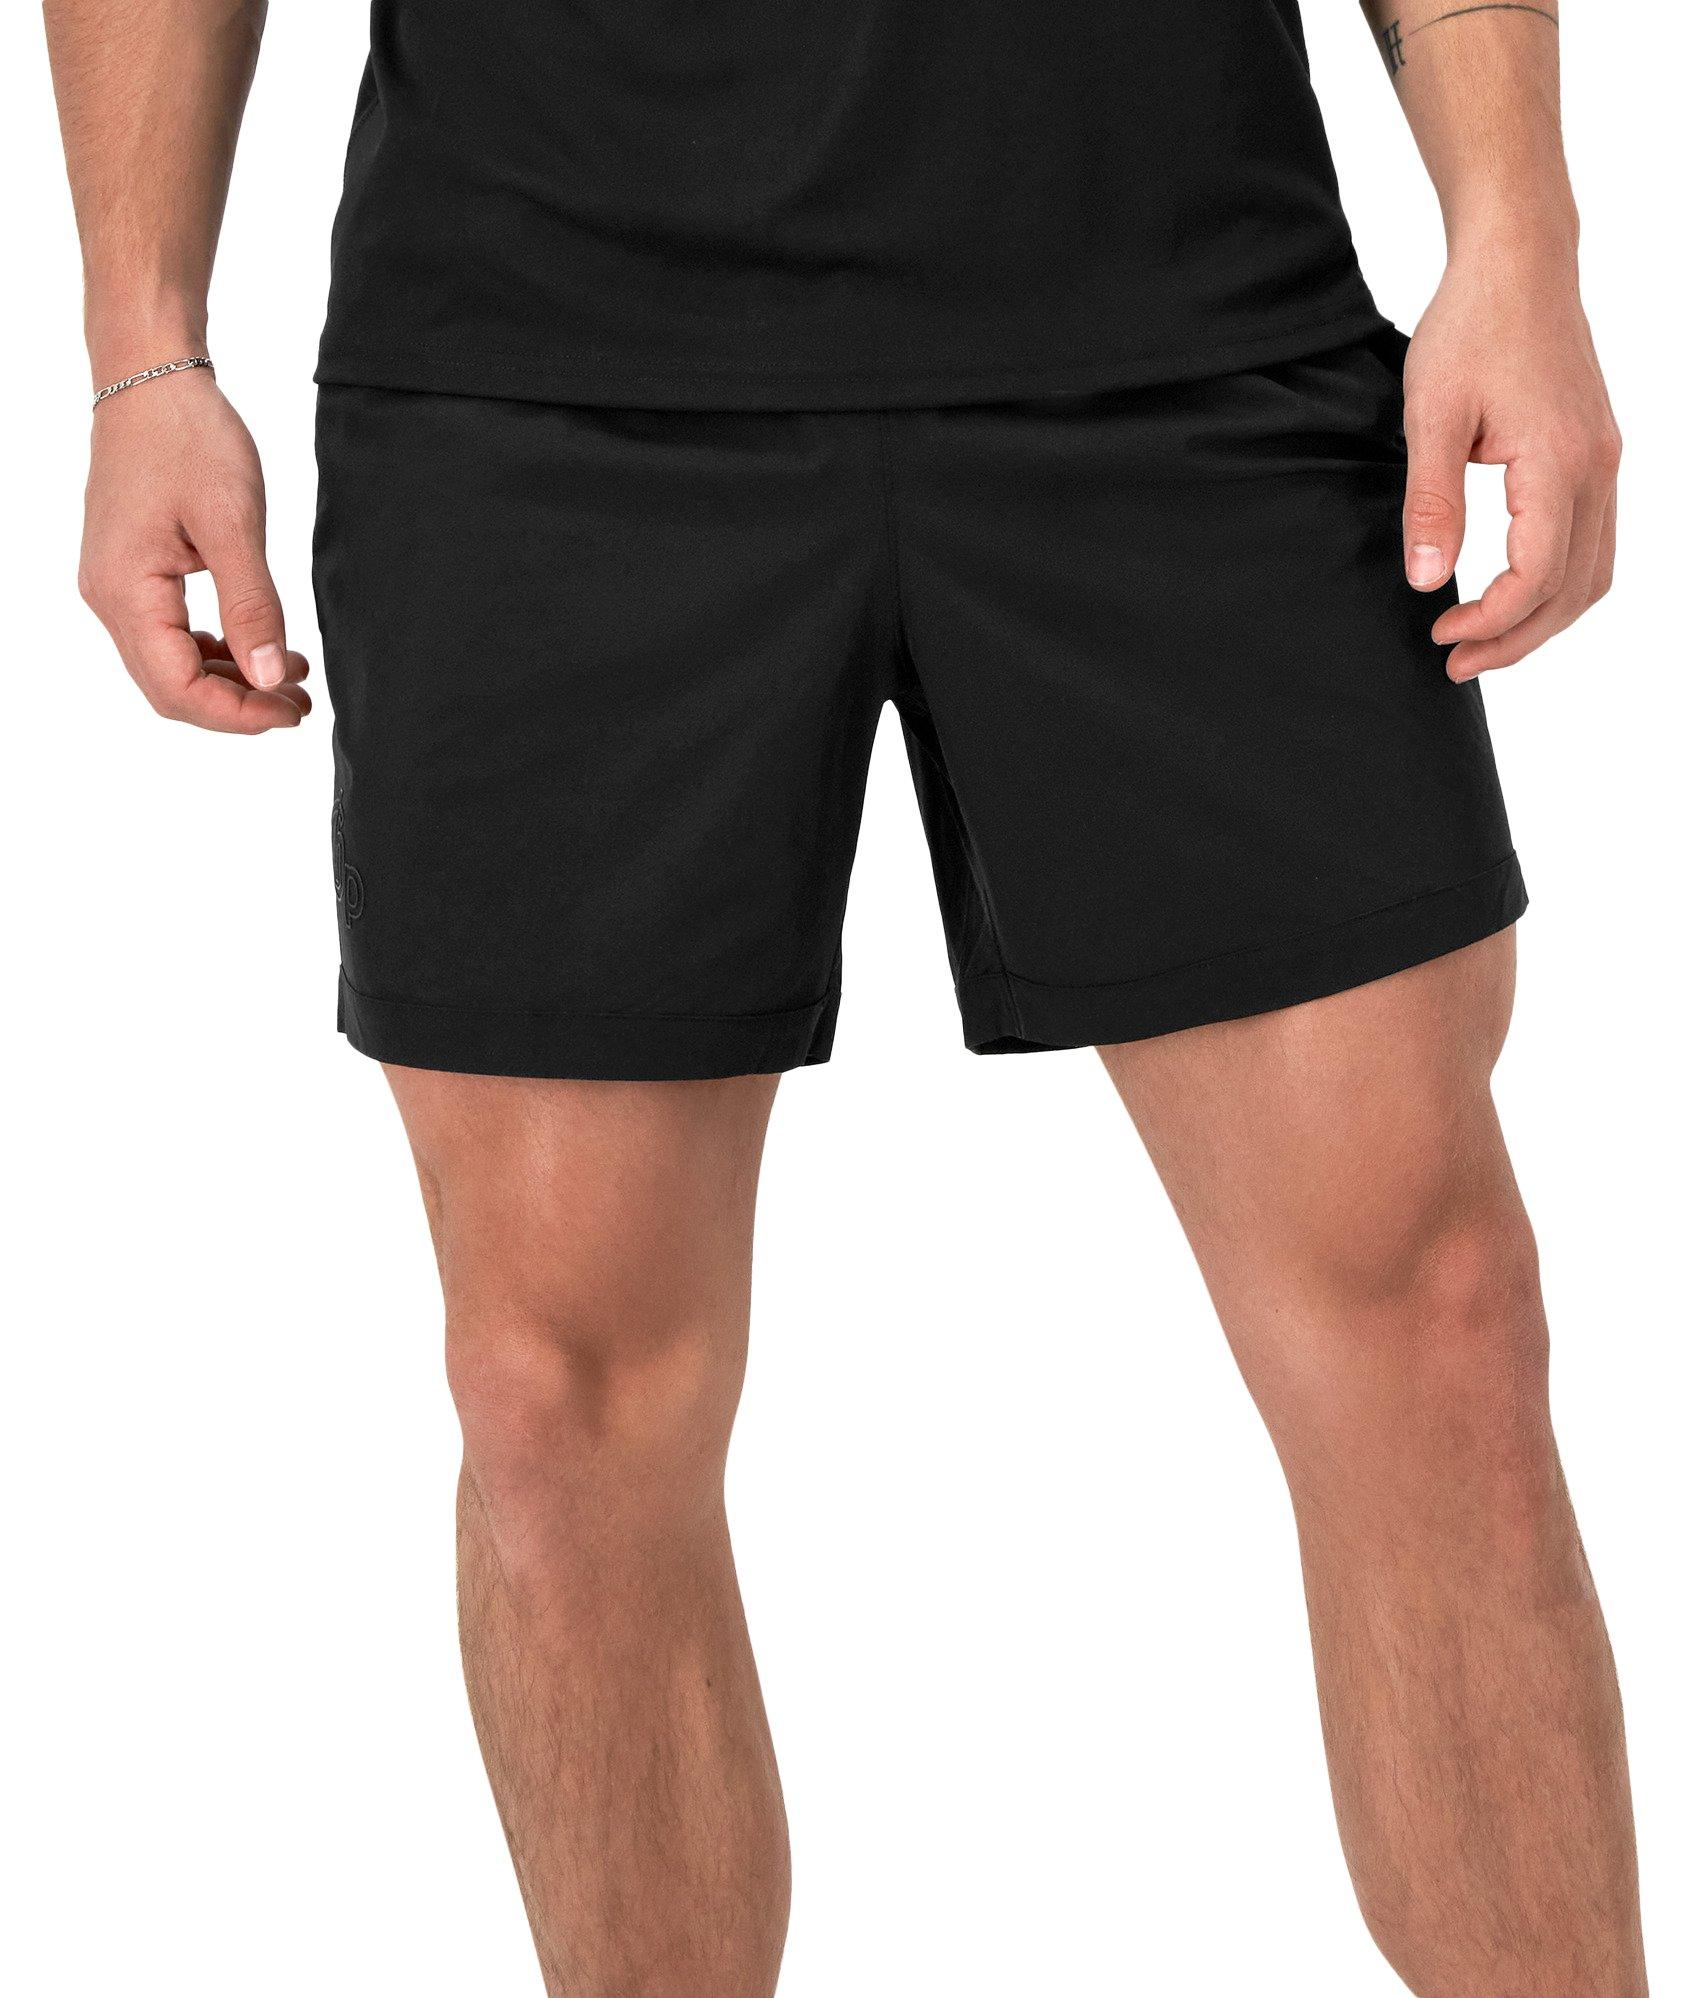 Champion Mens 6 in. All-Purpose Shorts